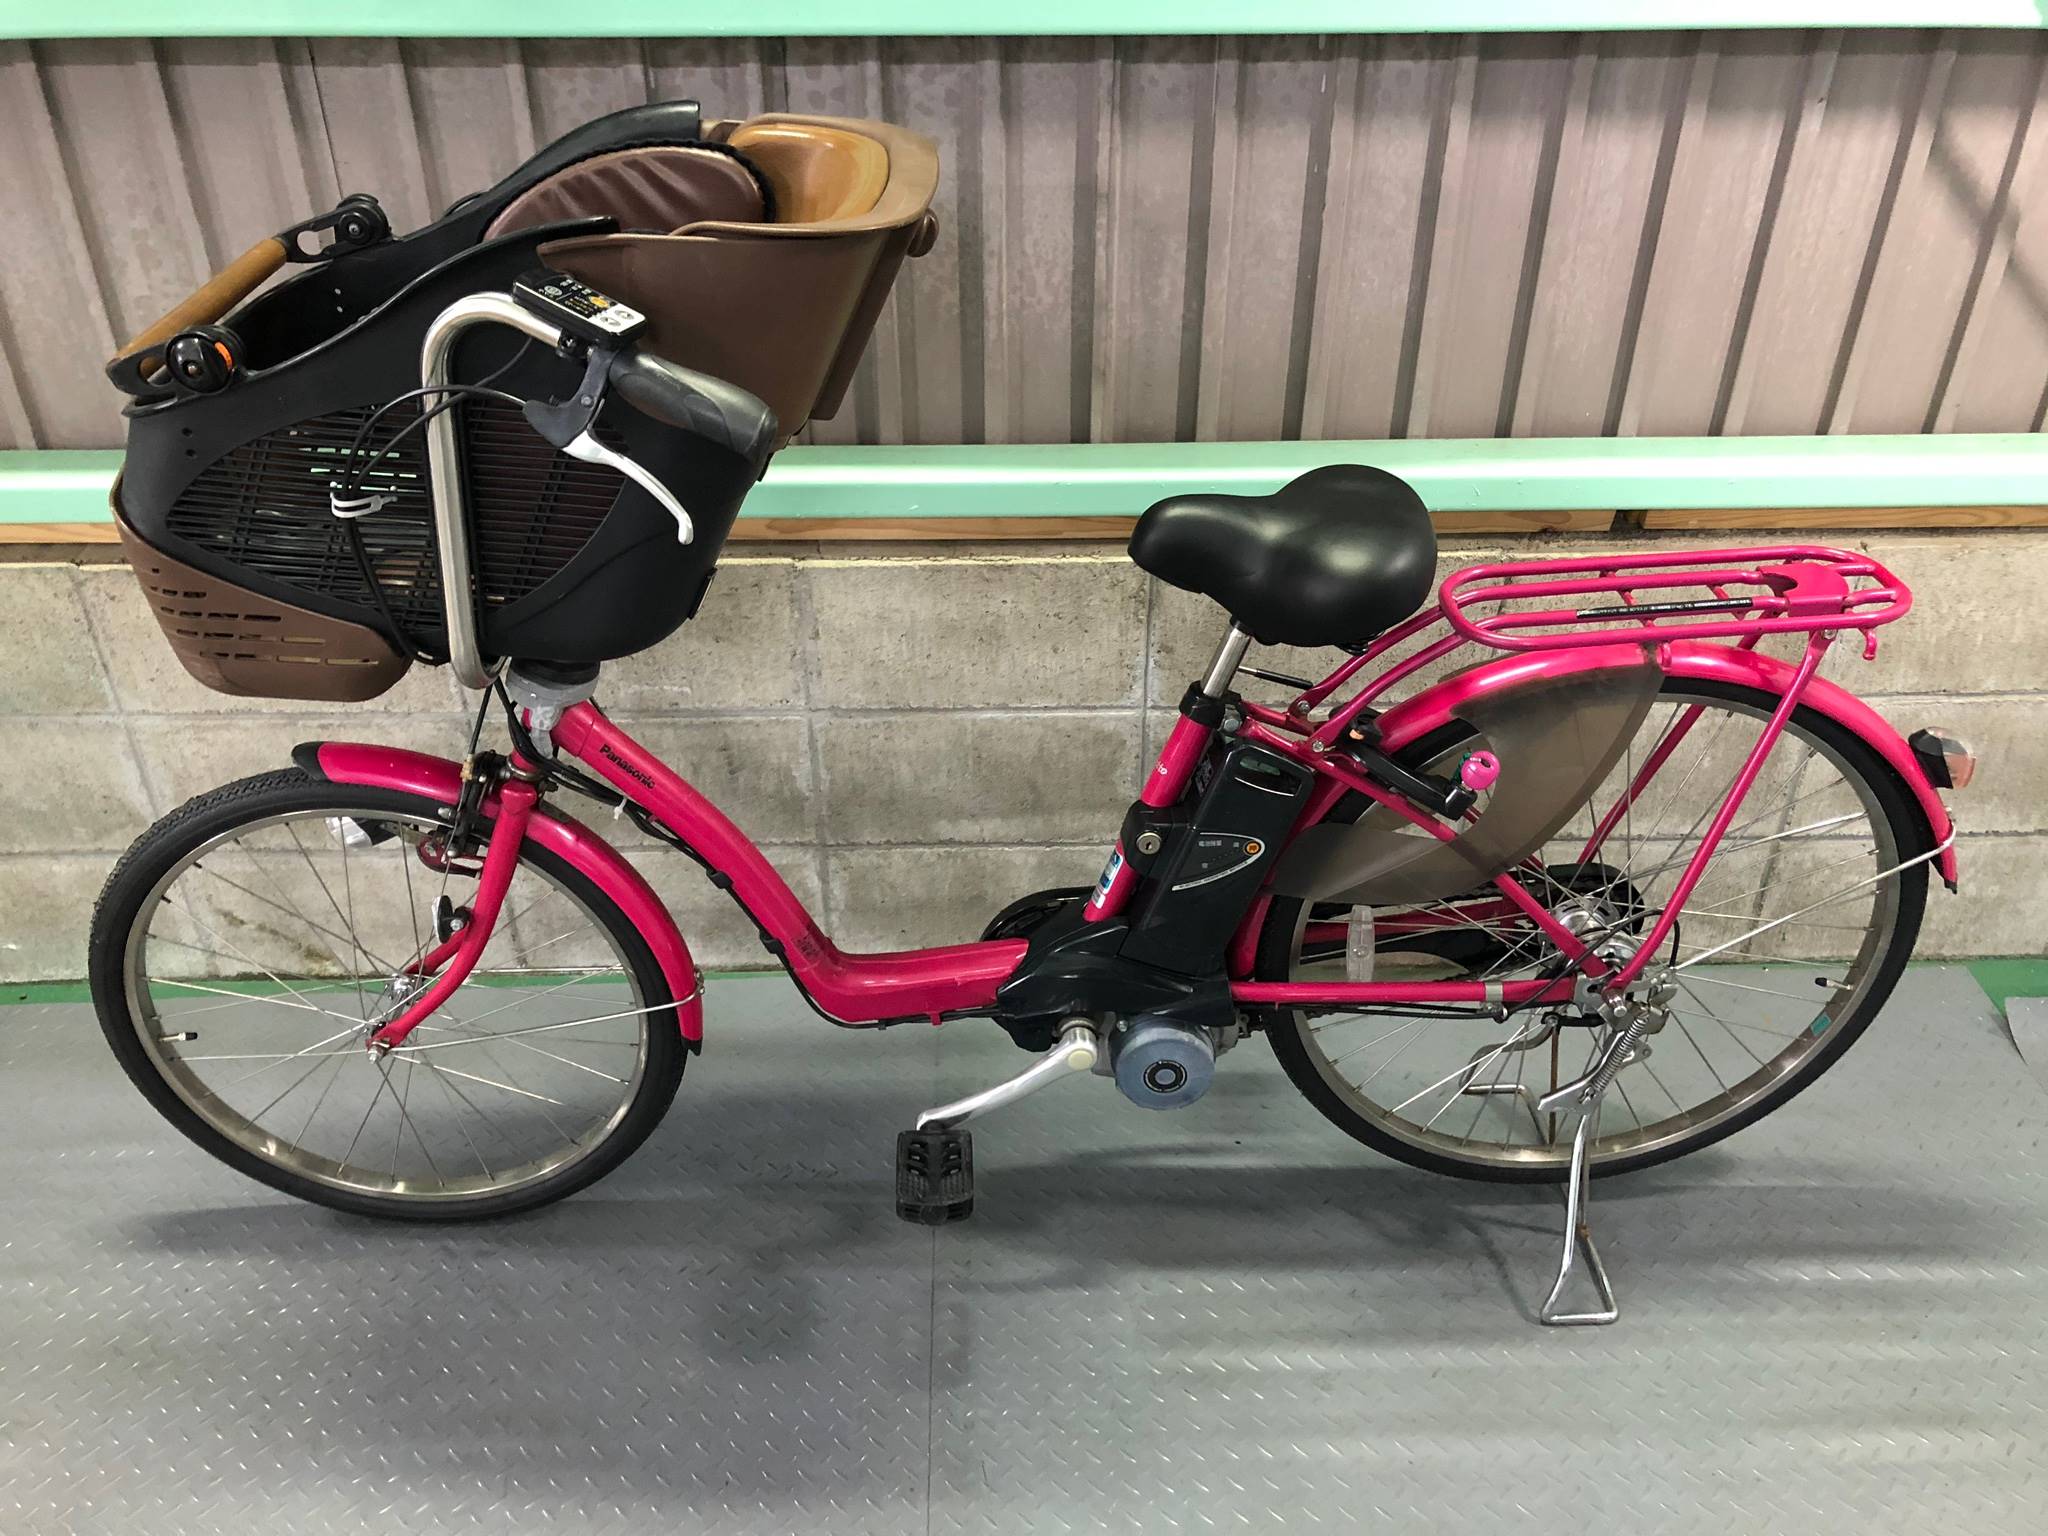 SOLD OUT】電動自転車 パナソニック ギュット ピンク 26インチ 子供 